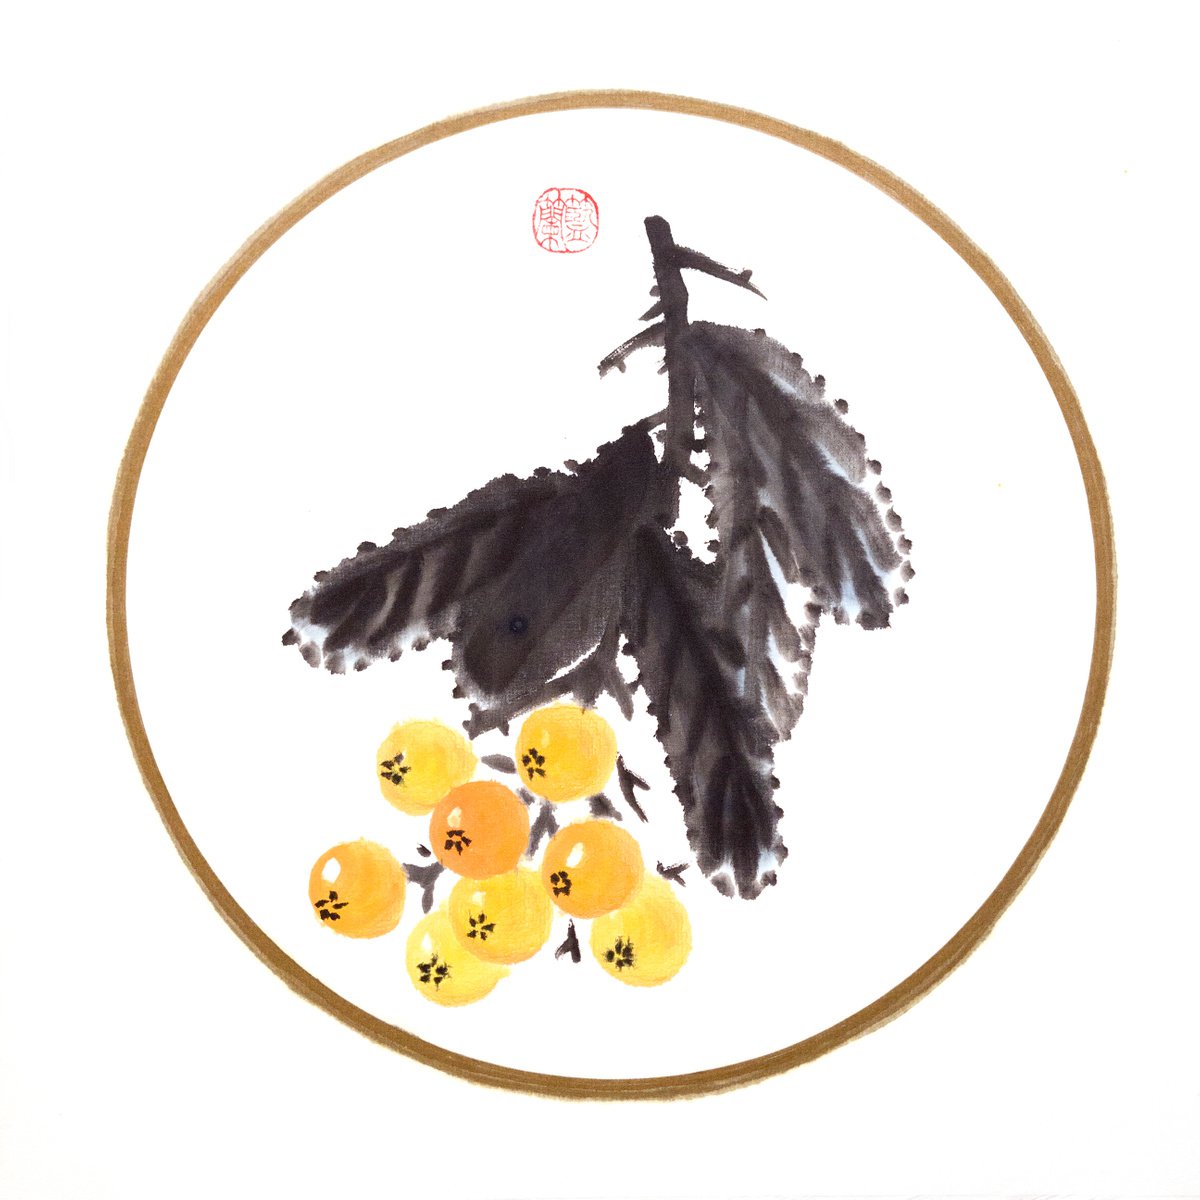 Branch of juicy loquat in a circle - Oriental Chinese Ink Painting by Ilana Shechter